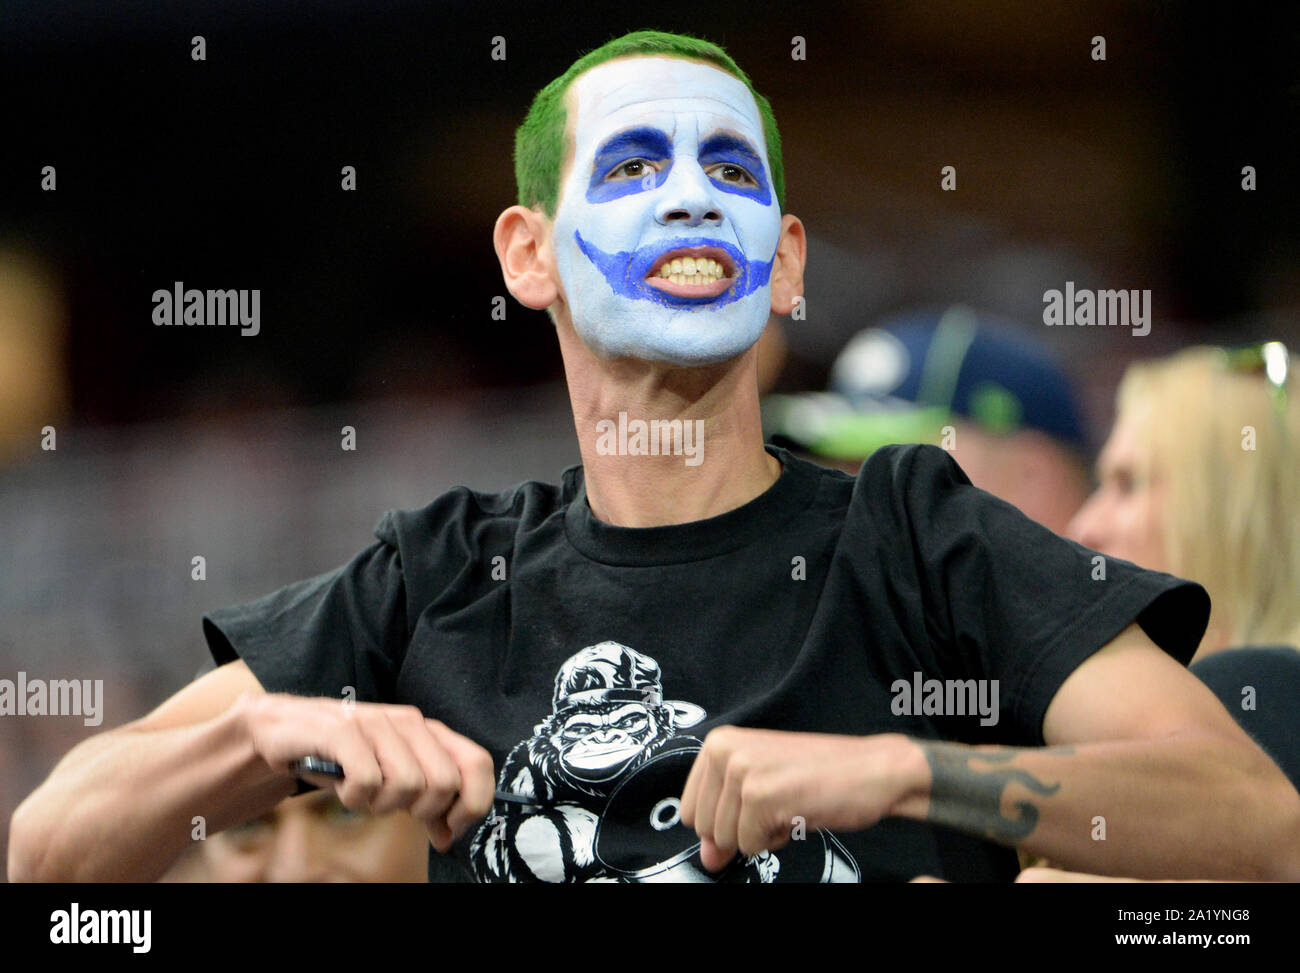 Glendale, United States. 29th Sep, 2019. A Seattle Seahawks' fan cheers his team on as the Seahawks play the Arizona Cardinals at State Farm Stadium in Glendale, Arizona on Sunday, September 29, 2019. Photo by Art Foxall/UPI Credit: UPI/Alamy Live News Stock Photo